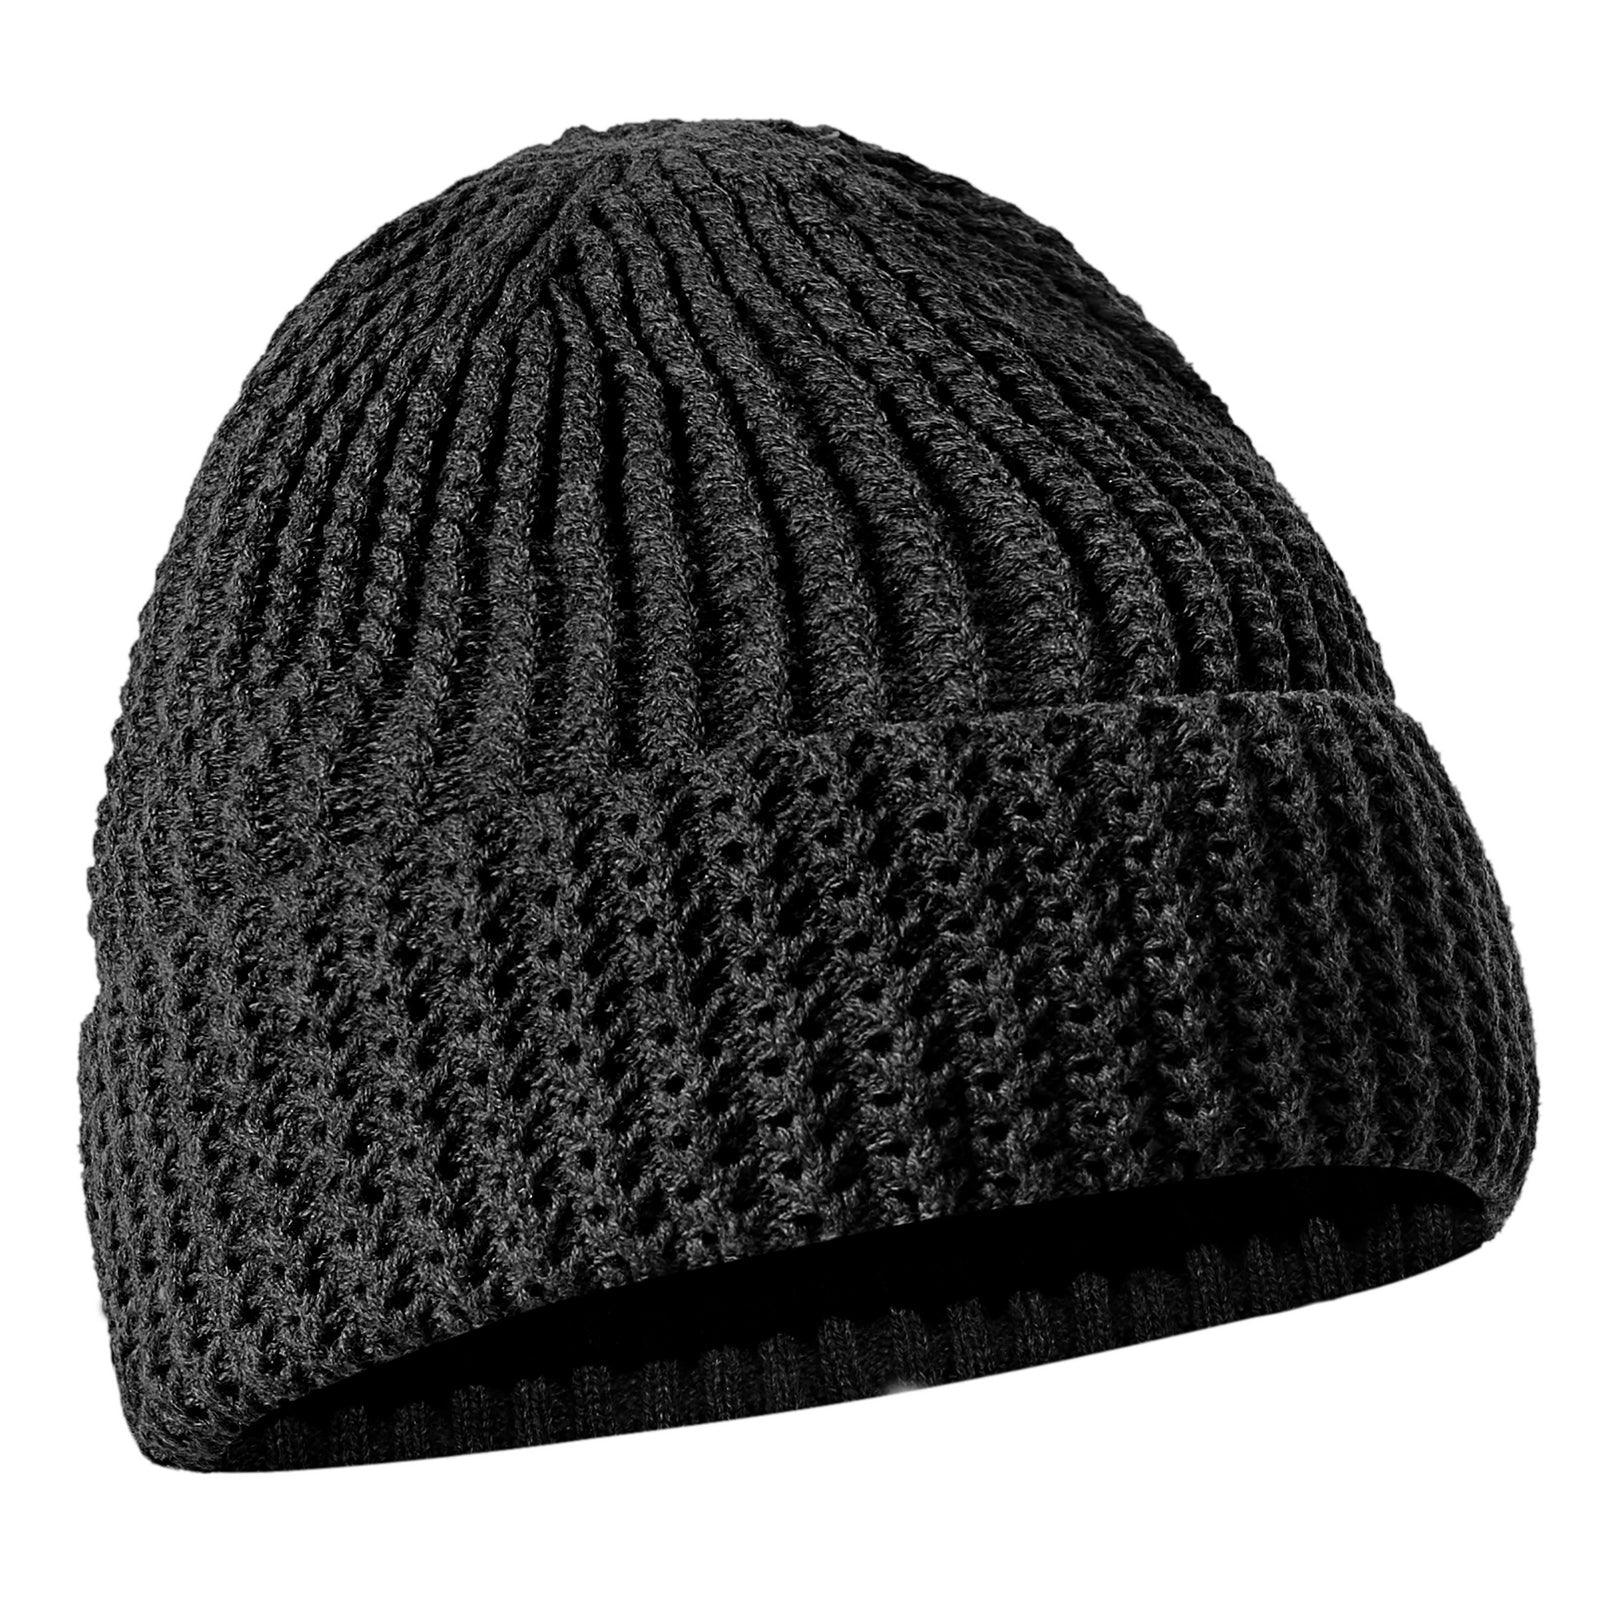 W6464 - Mens Boys Ladies Unisex Wooly Knitted Beanie Ski Hat Warm Winter Turn Up Chunky-TruClothing